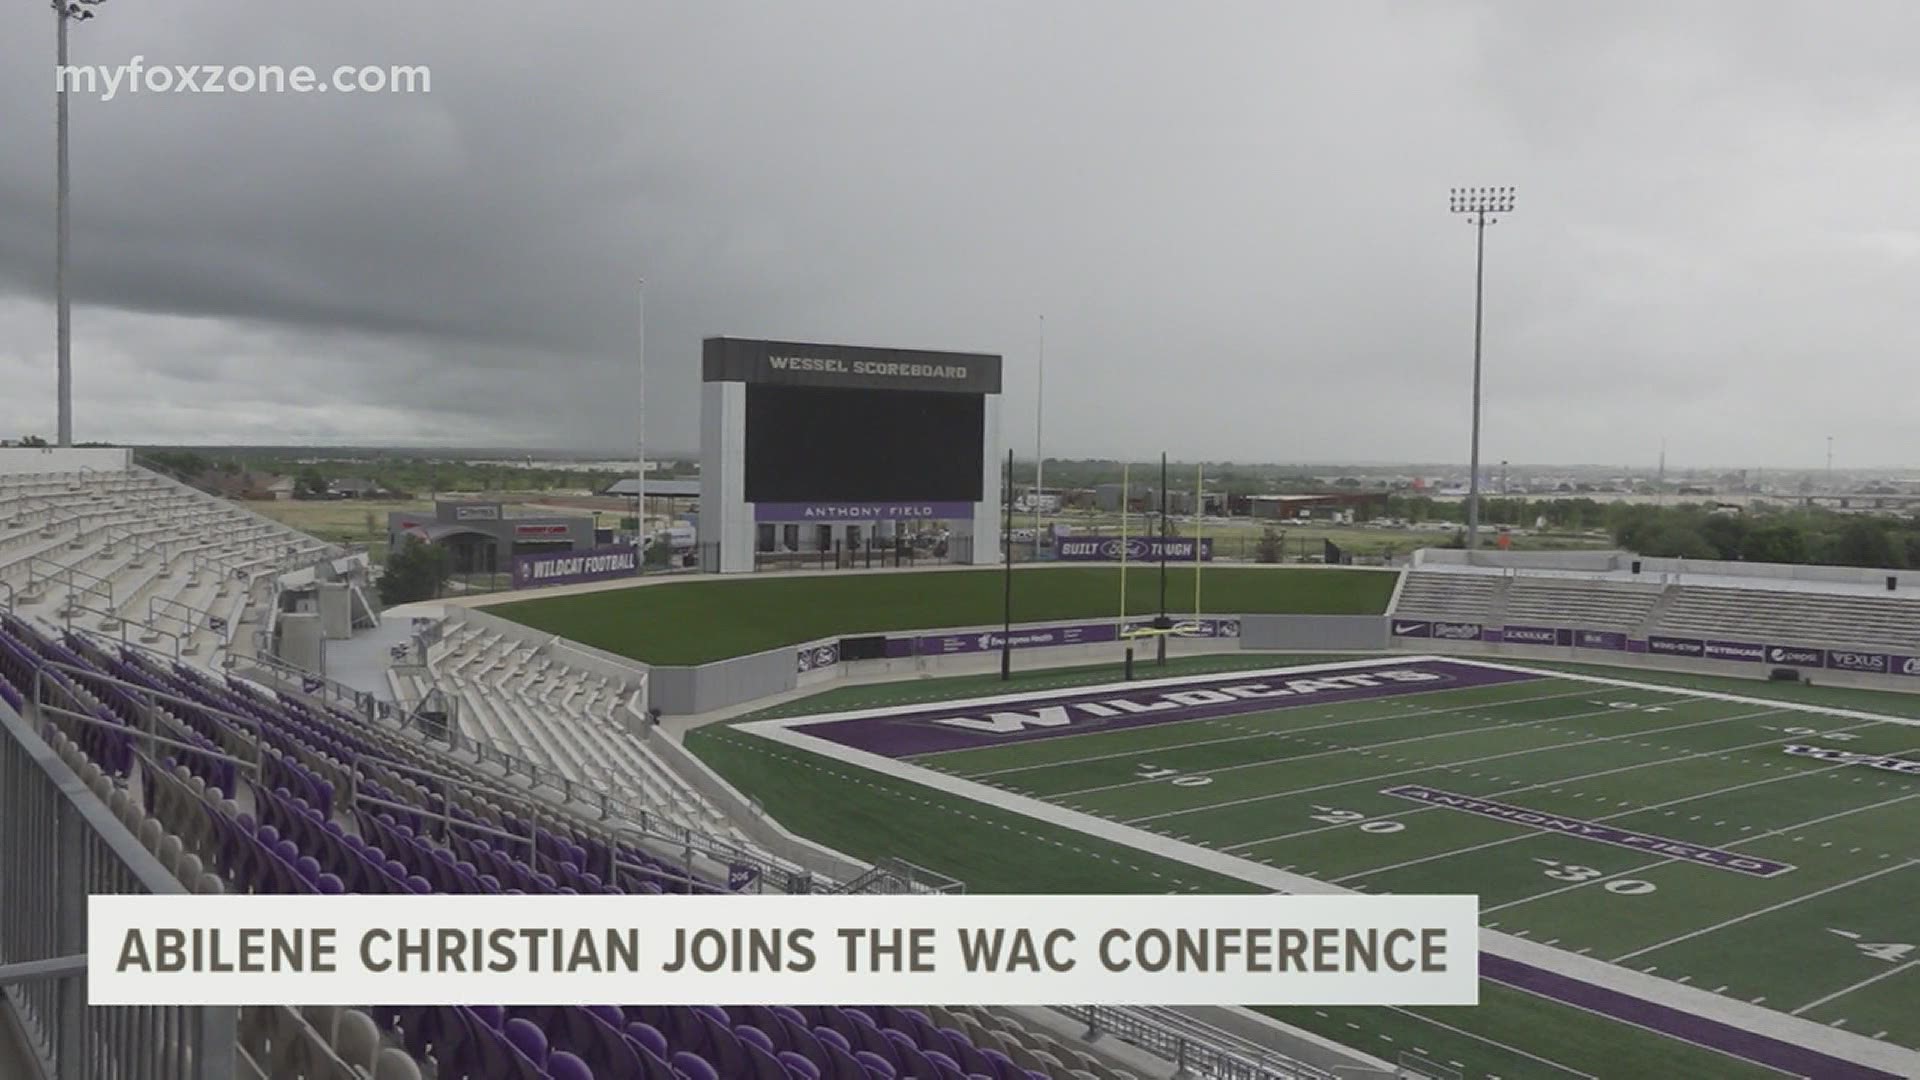 Women’s soccer will be the first team to compete in the WAC this fall.